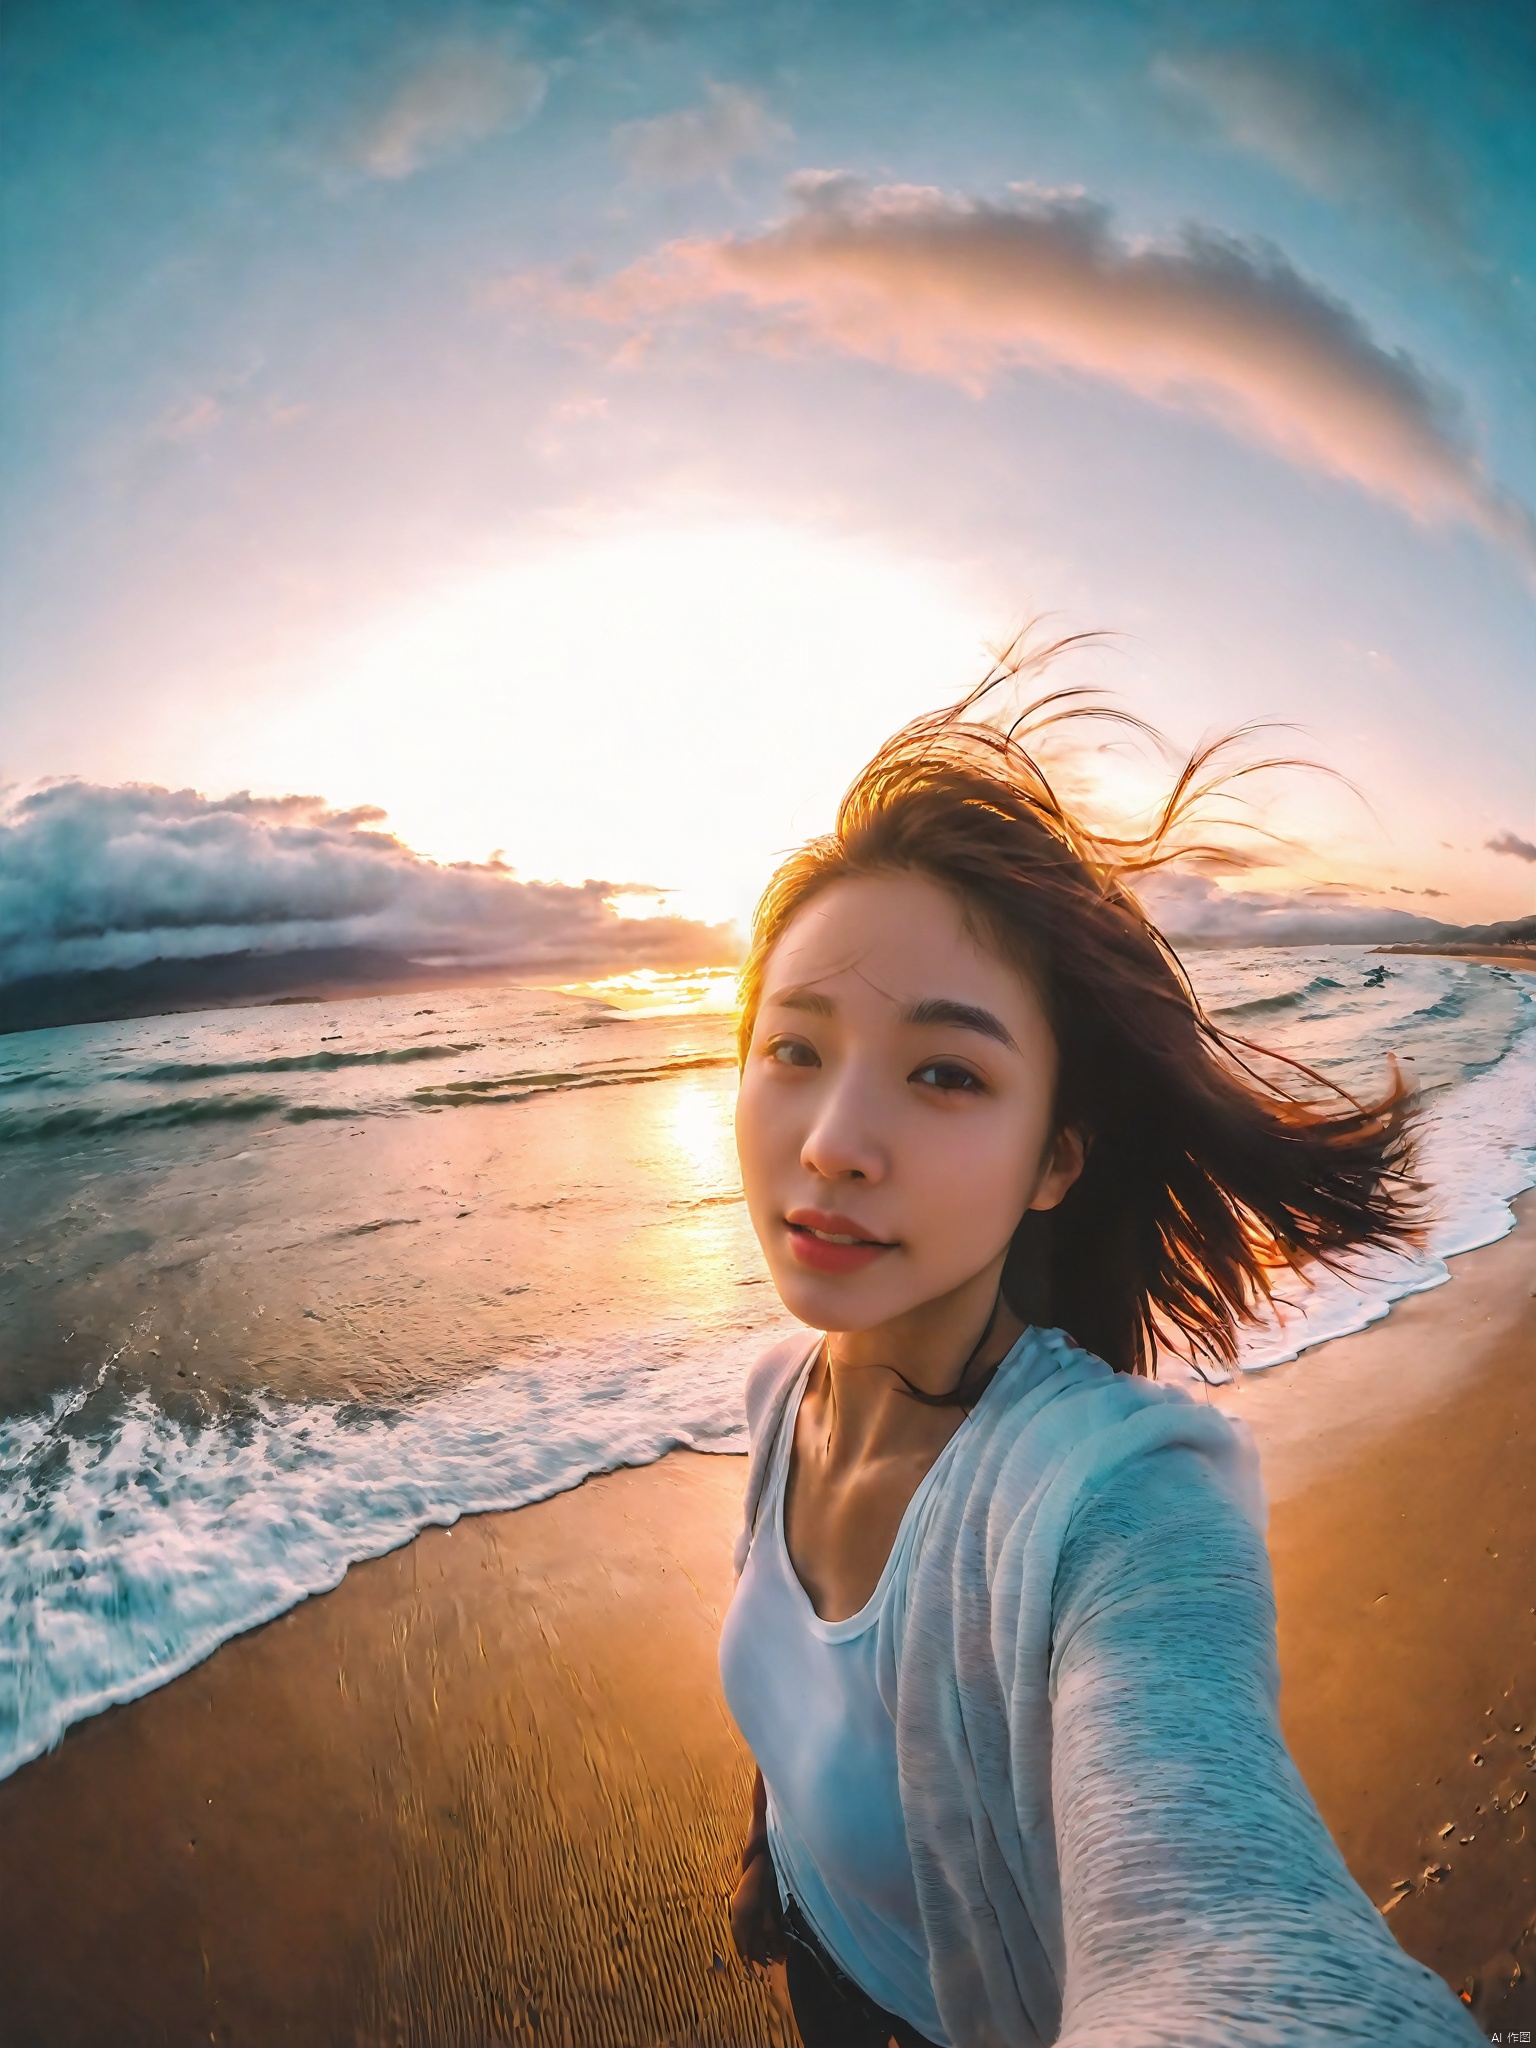  xxmix_girl,a woman takes a fisheye selfie on a beach at sunset, the wind blowing through her messy hair. The sea stretches out behind her, creating a stunning aesthetic and atmosphere with a rating of 1.2.,xxmix girl woman